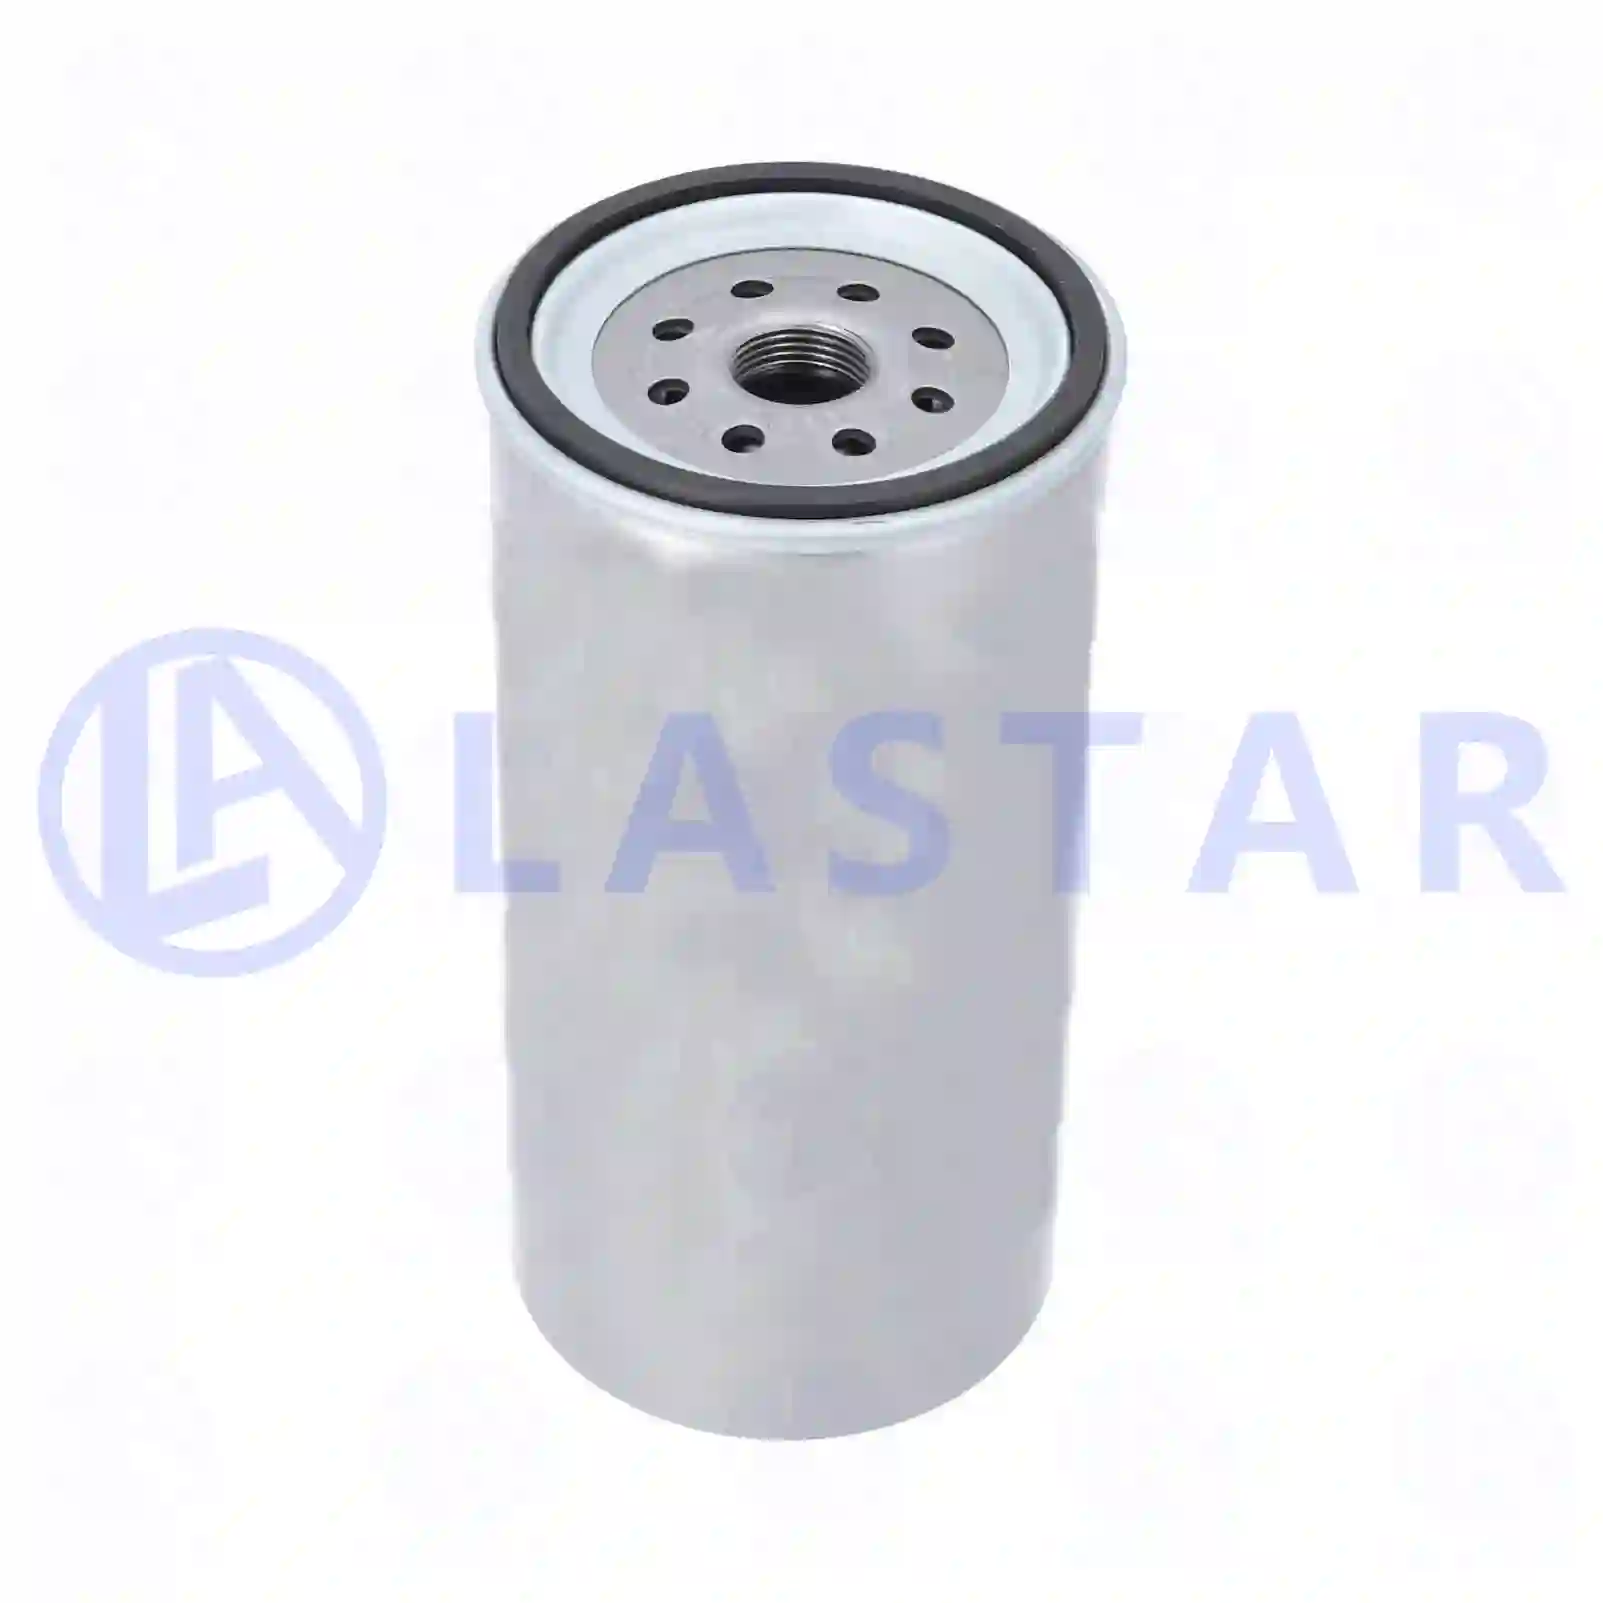 Fuel filter, water separator, 77723744, 42554067, 504166113, 10101998, 0004771302, 0004771702, 11110683, ZG10160-0008 ||  77723744 Lastar Spare Part | Truck Spare Parts, Auotomotive Spare Parts Fuel filter, water separator, 77723744, 42554067, 504166113, 10101998, 0004771302, 0004771702, 11110683, ZG10160-0008 ||  77723744 Lastar Spare Part | Truck Spare Parts, Auotomotive Spare Parts